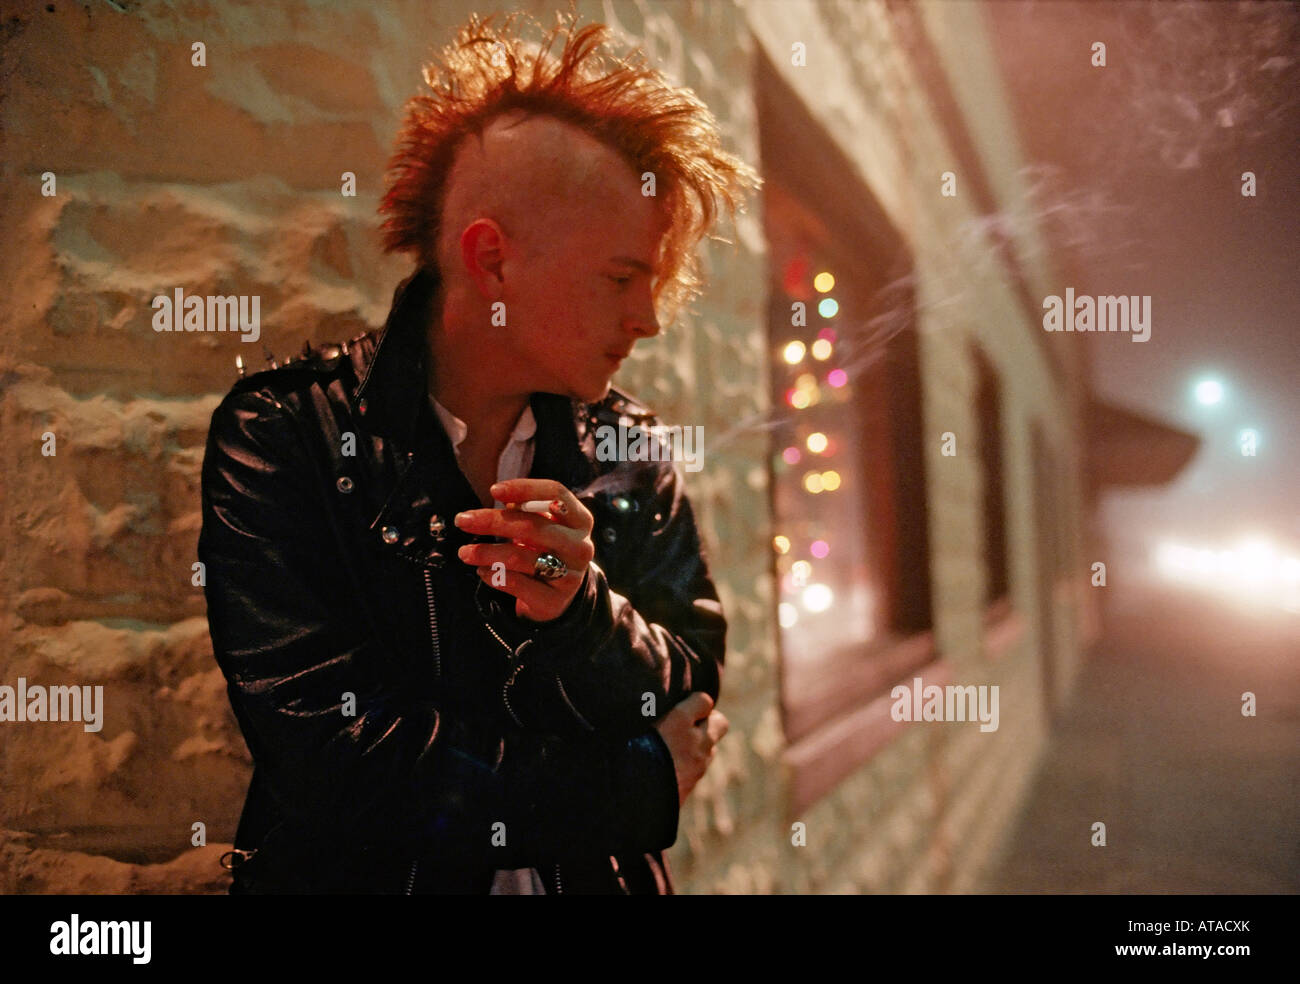 Young man with mohawk haircut smokes a cigarette outside an alternative nightclub club in Jacksonville Florida USA Stock Photo